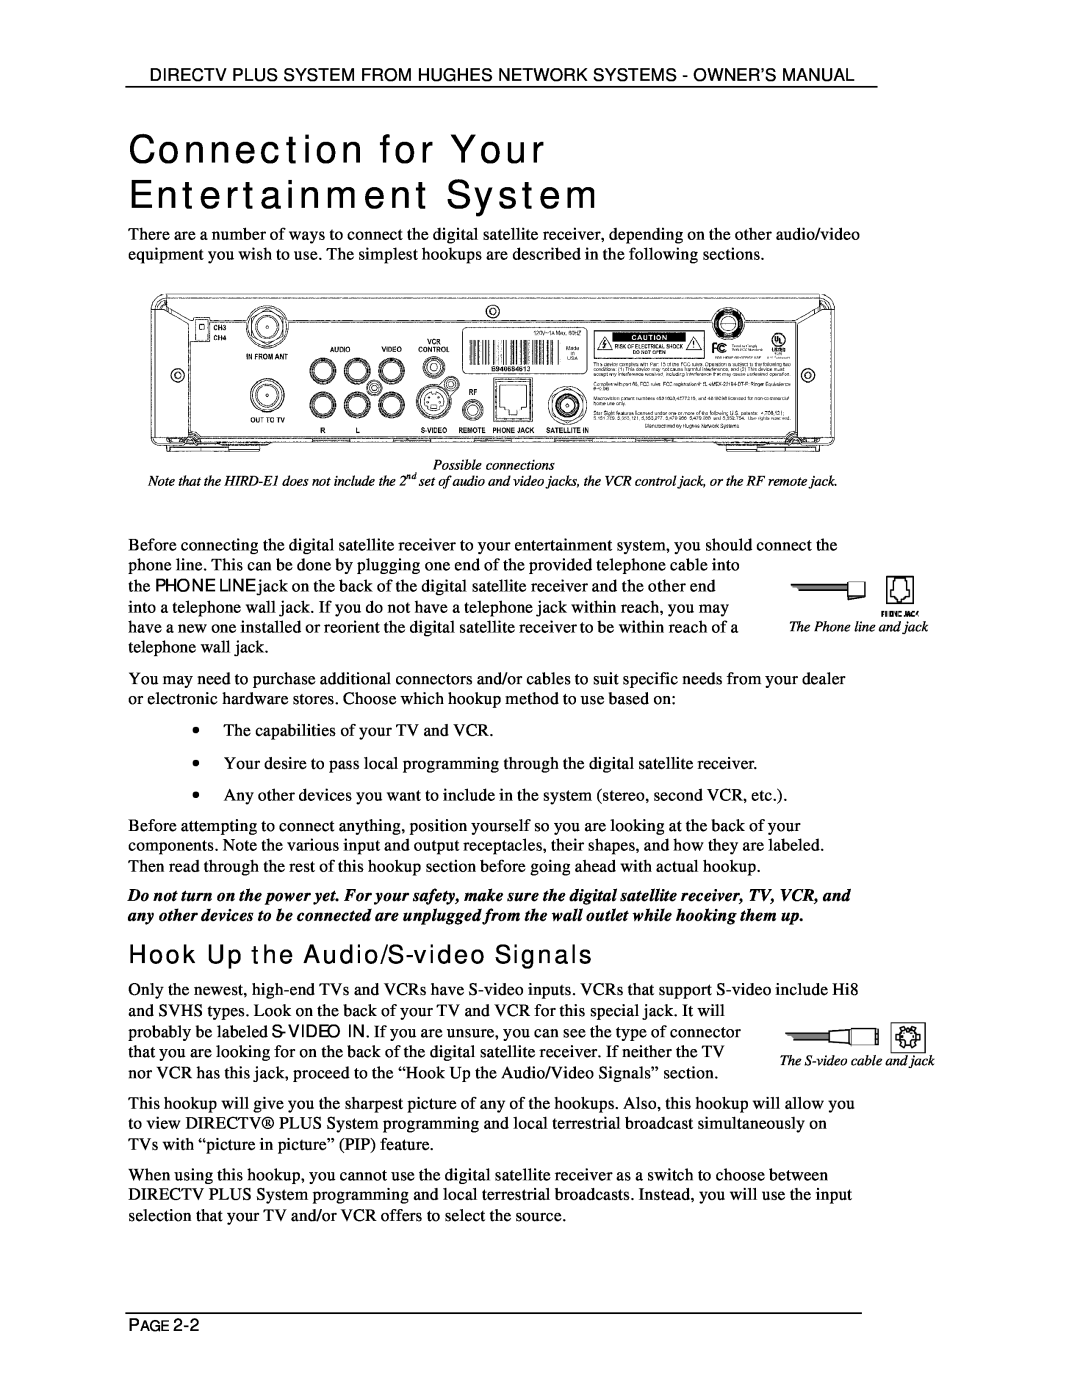 DirecTV HIRD-E25, HIRD-E11 owner manual Connection for Your Entertainment System, Hook Up the Audio/S-videoSignals 